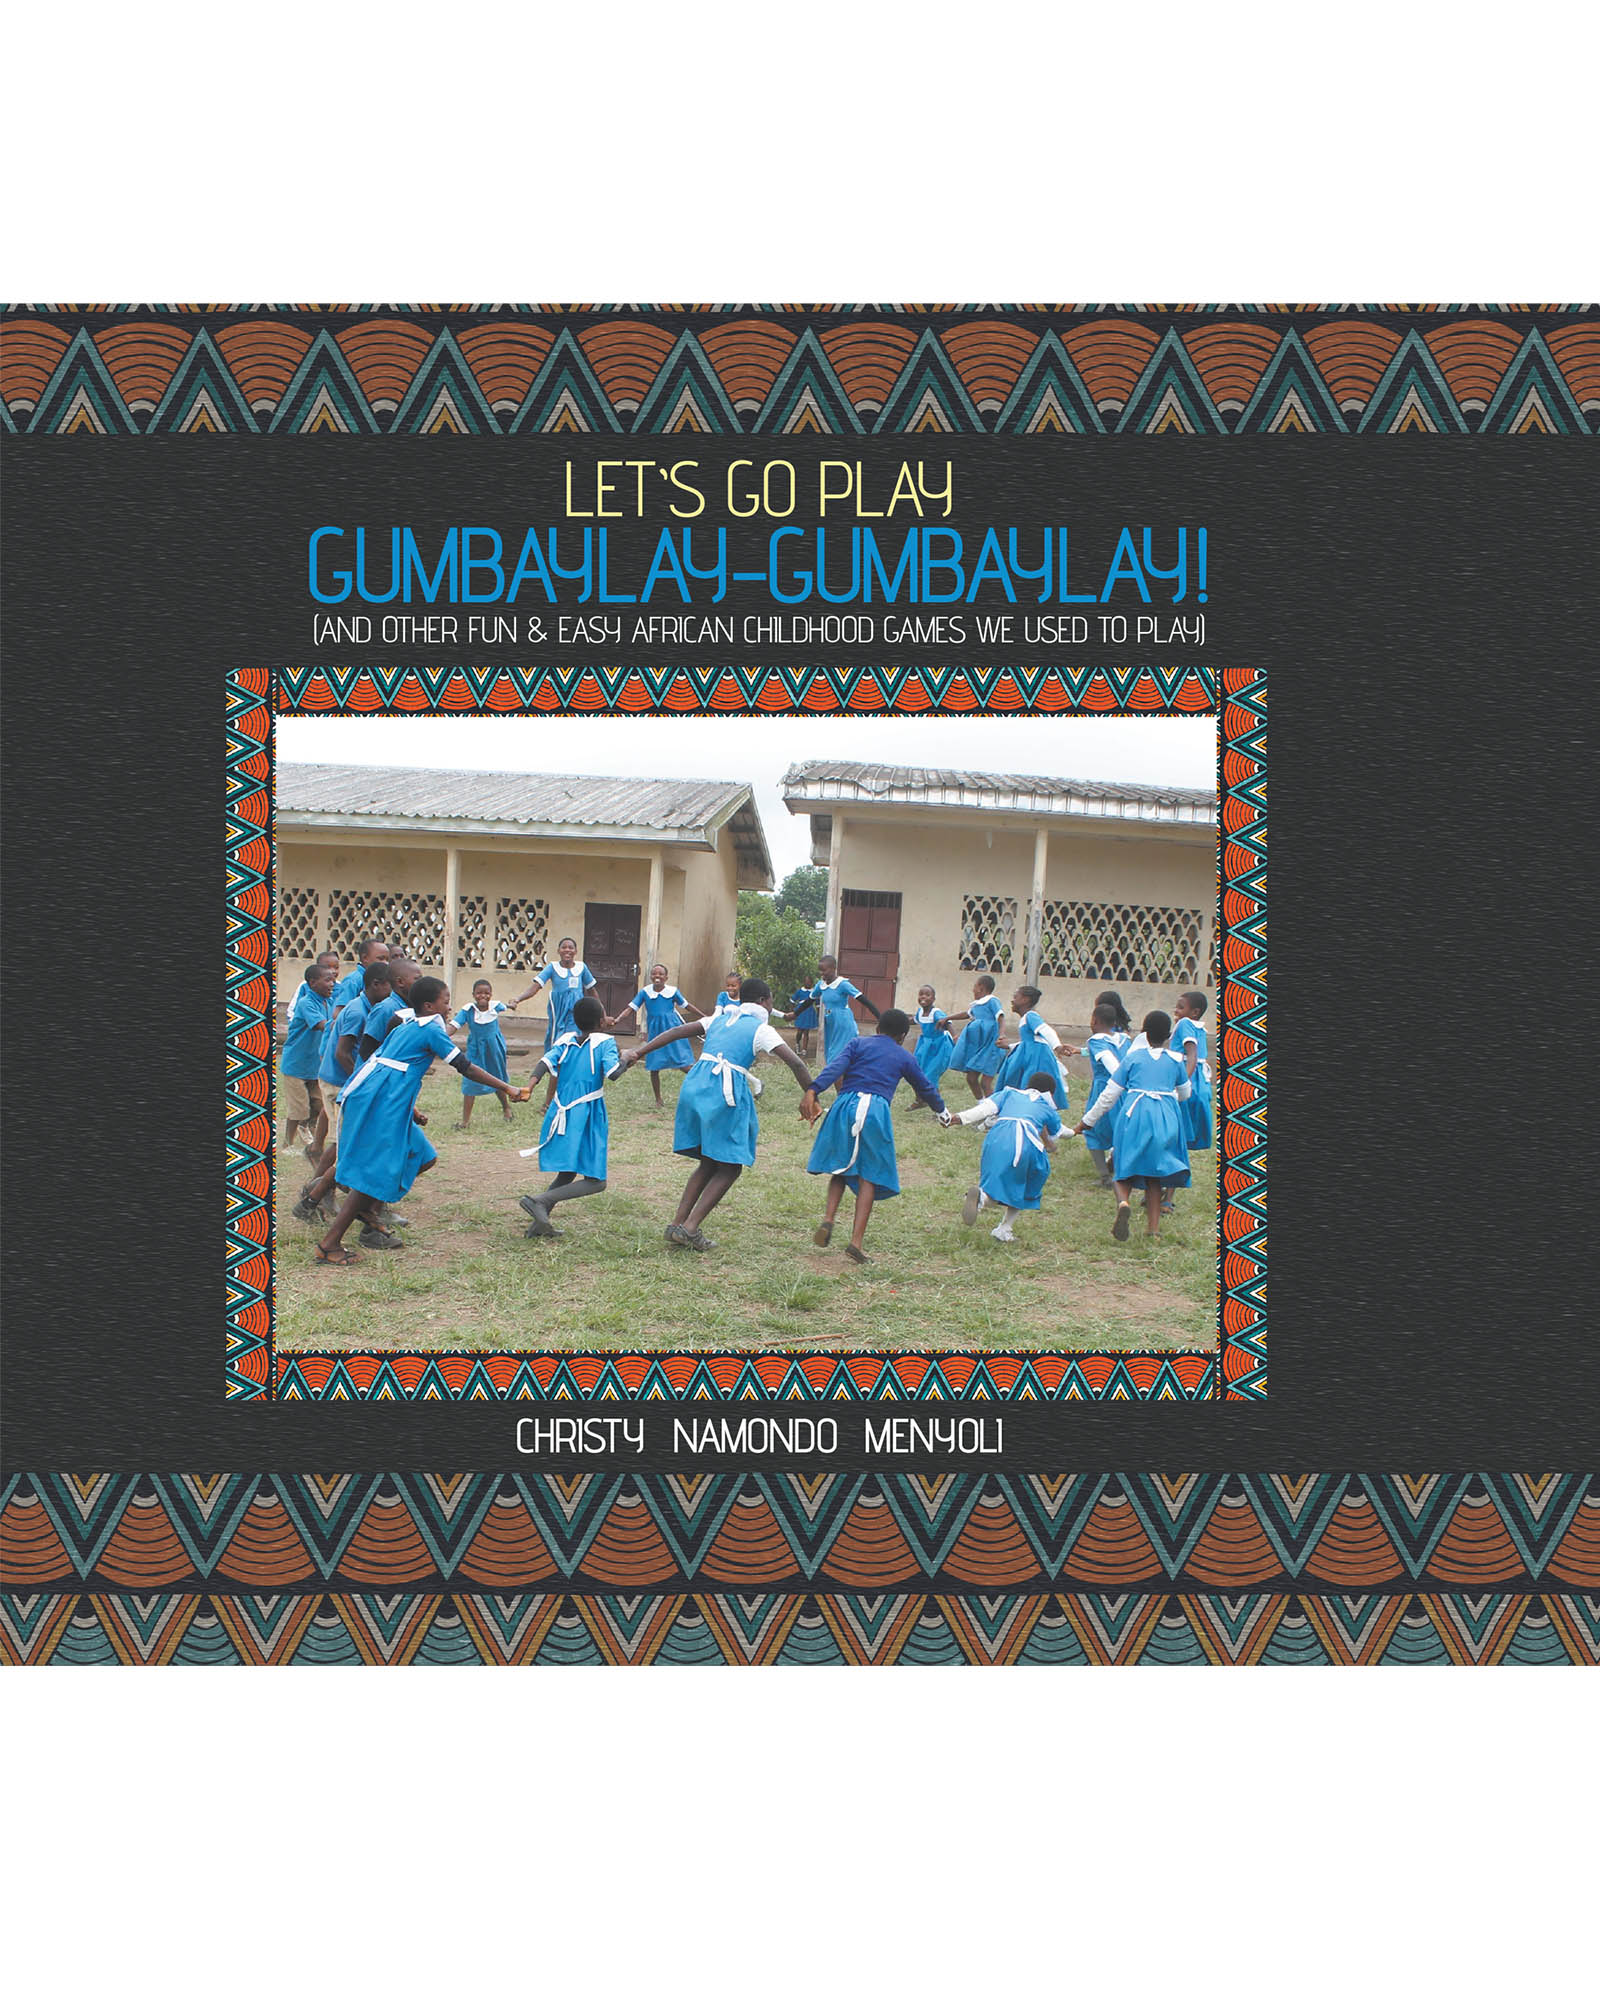  Let's Go Play GumBayLay-GumBayLay! Cover Image